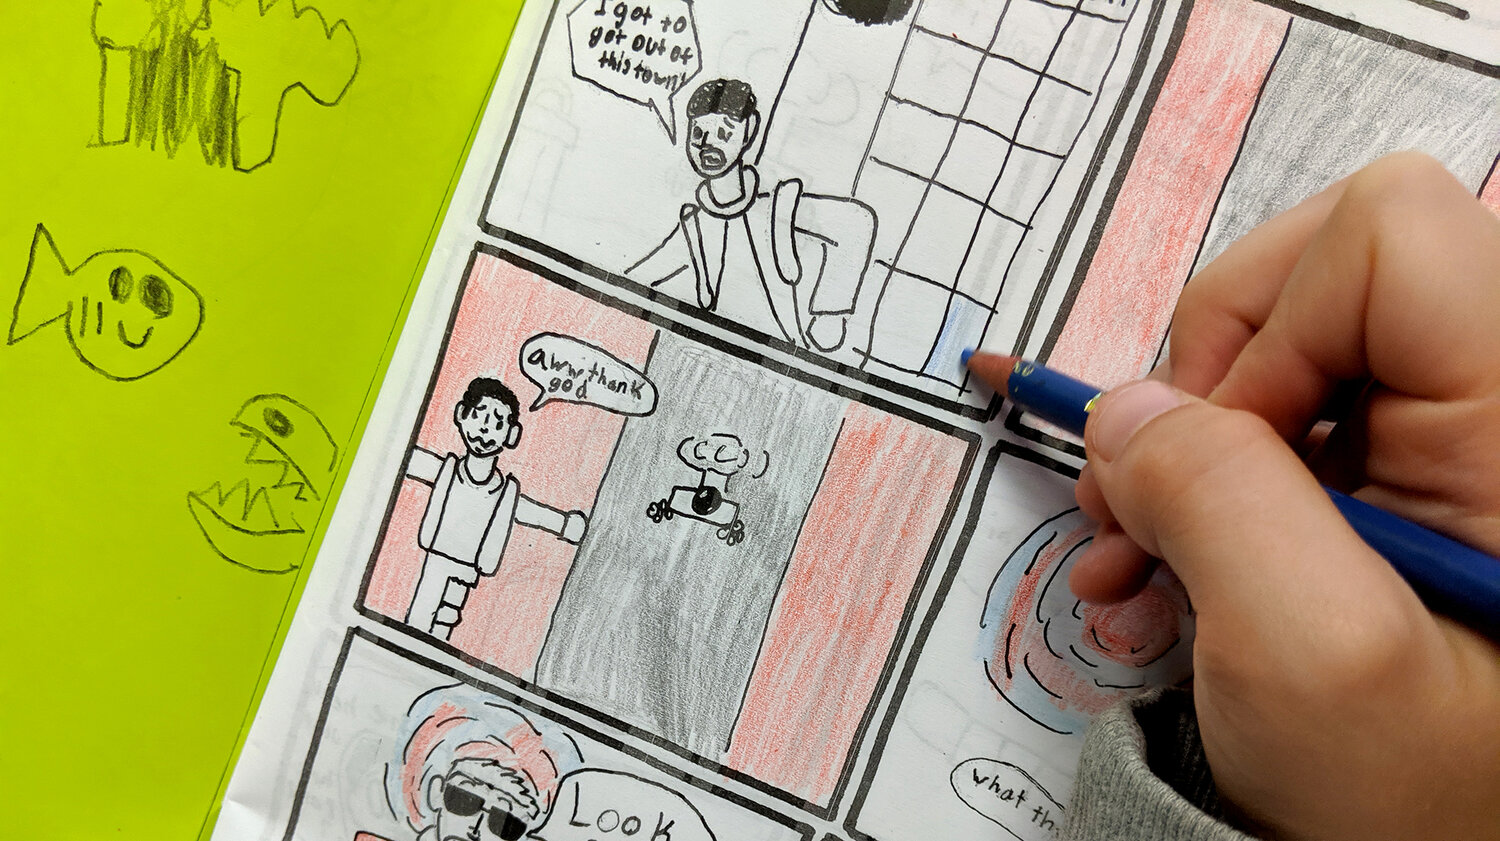 Kids Writing Journal For Comics Creation: Draw Your Own Comic Book | Write  And Draw Graphic Novels For Kids 8-10 | Comics Small Activity Books For